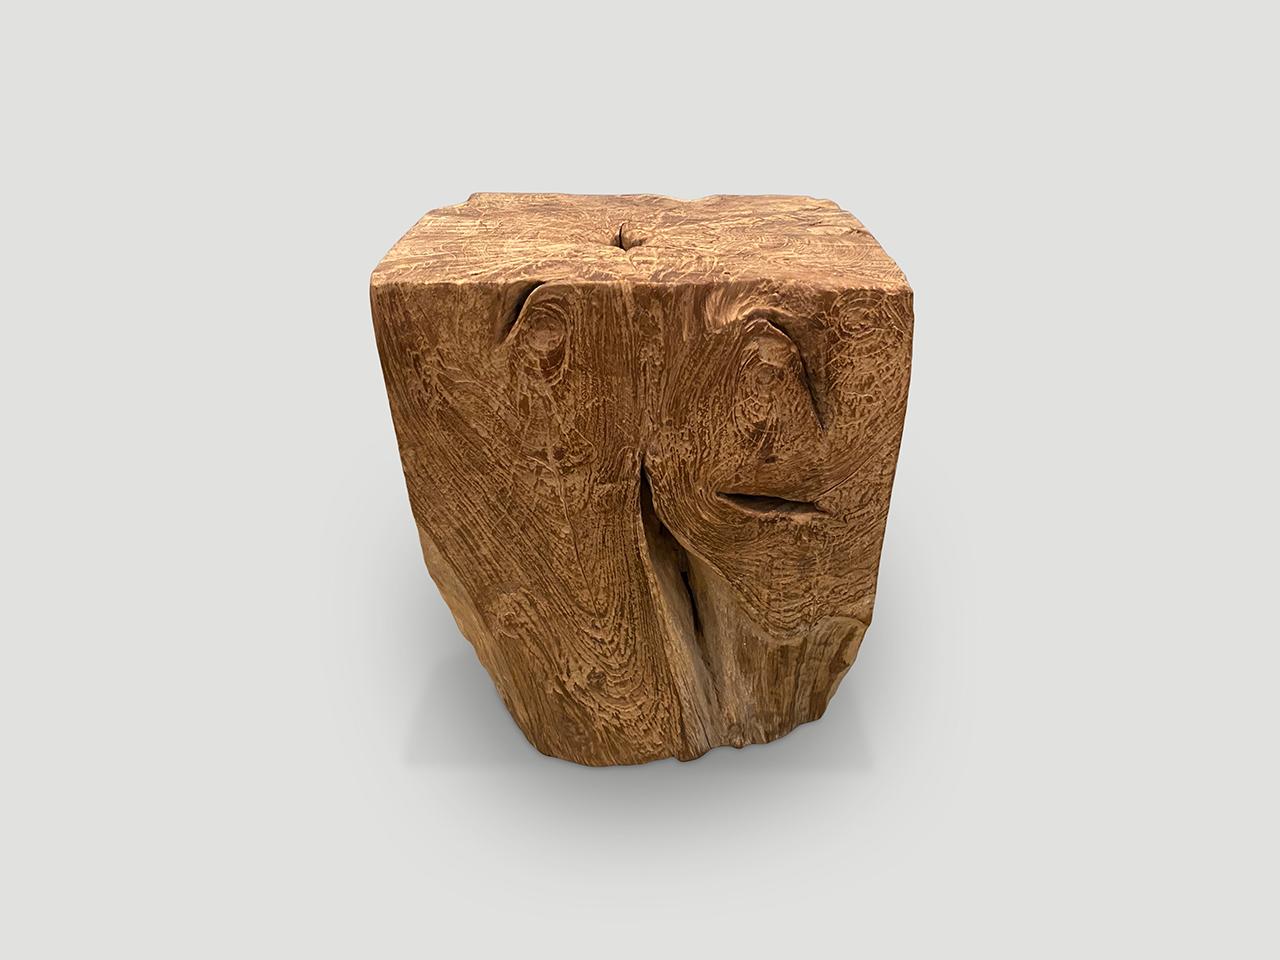 Beautiful aged teak wood carved into a minimalist side table or stool. 

This side table or stool was hand made in the spirit of Wabi-Sabi, a Japanese philosophy that beauty can be found in imperfection and impermanence. It is a beauty of things